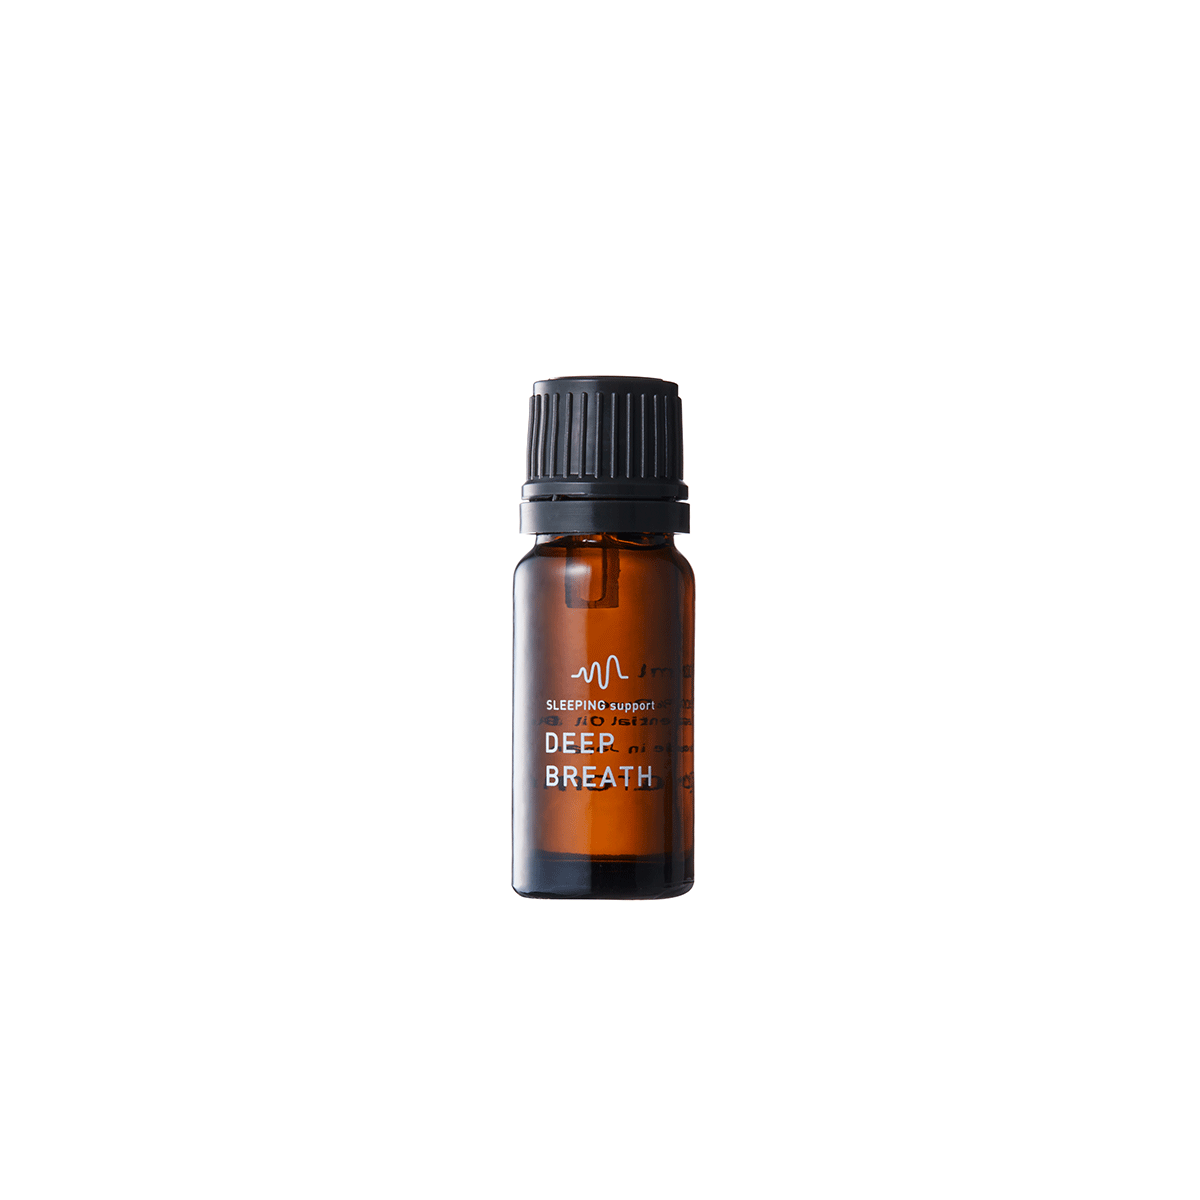 SLEEPING support　Essential Oil 10ml